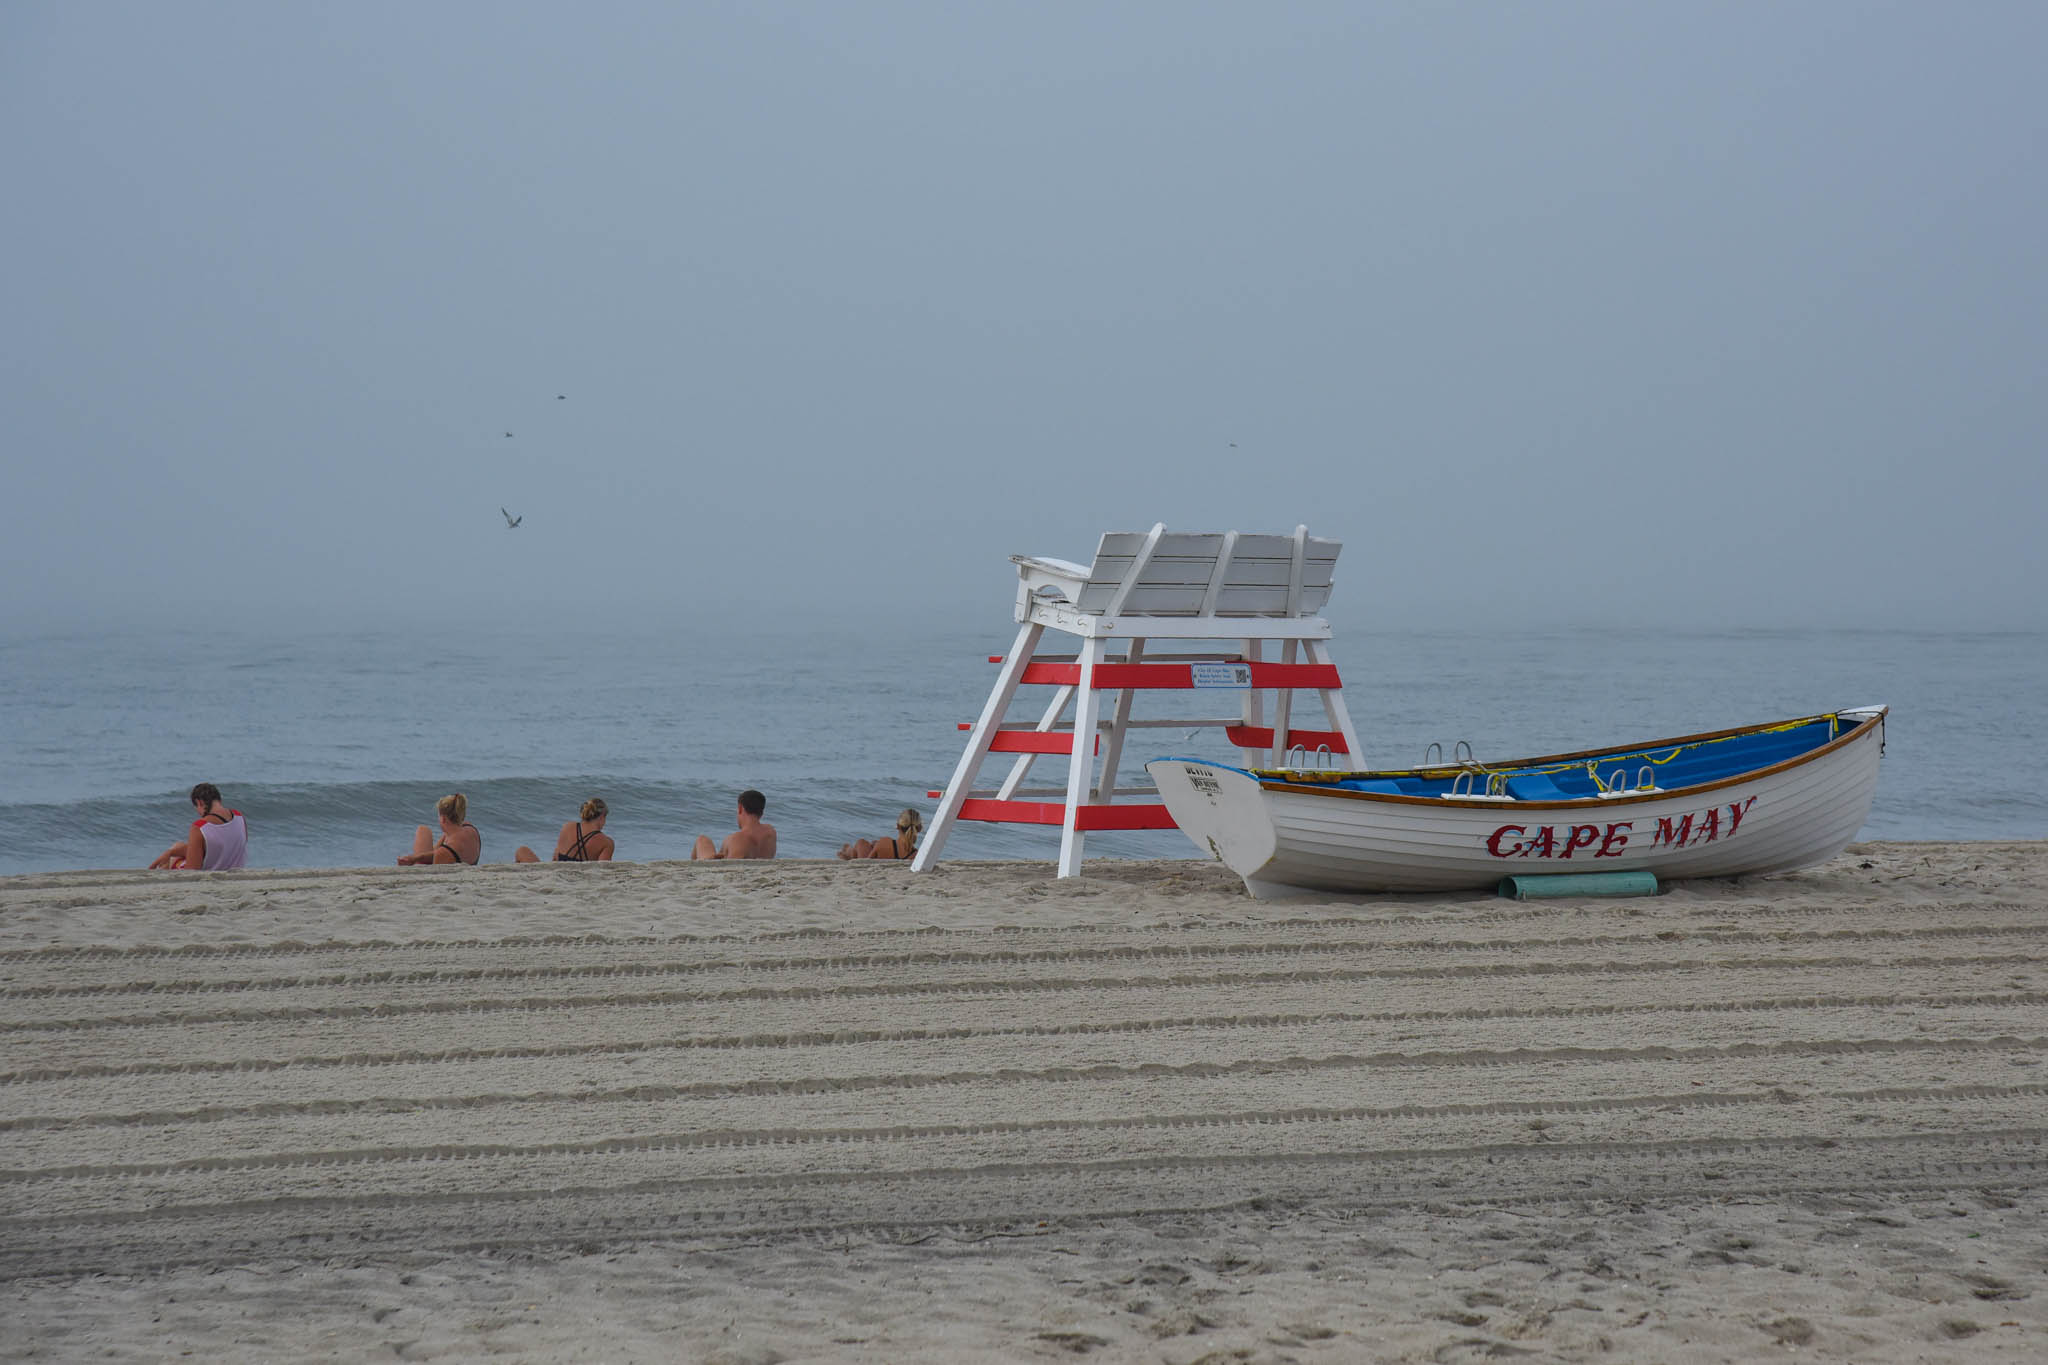 People working out in front of the Lifeguard stand and Boat on the beach